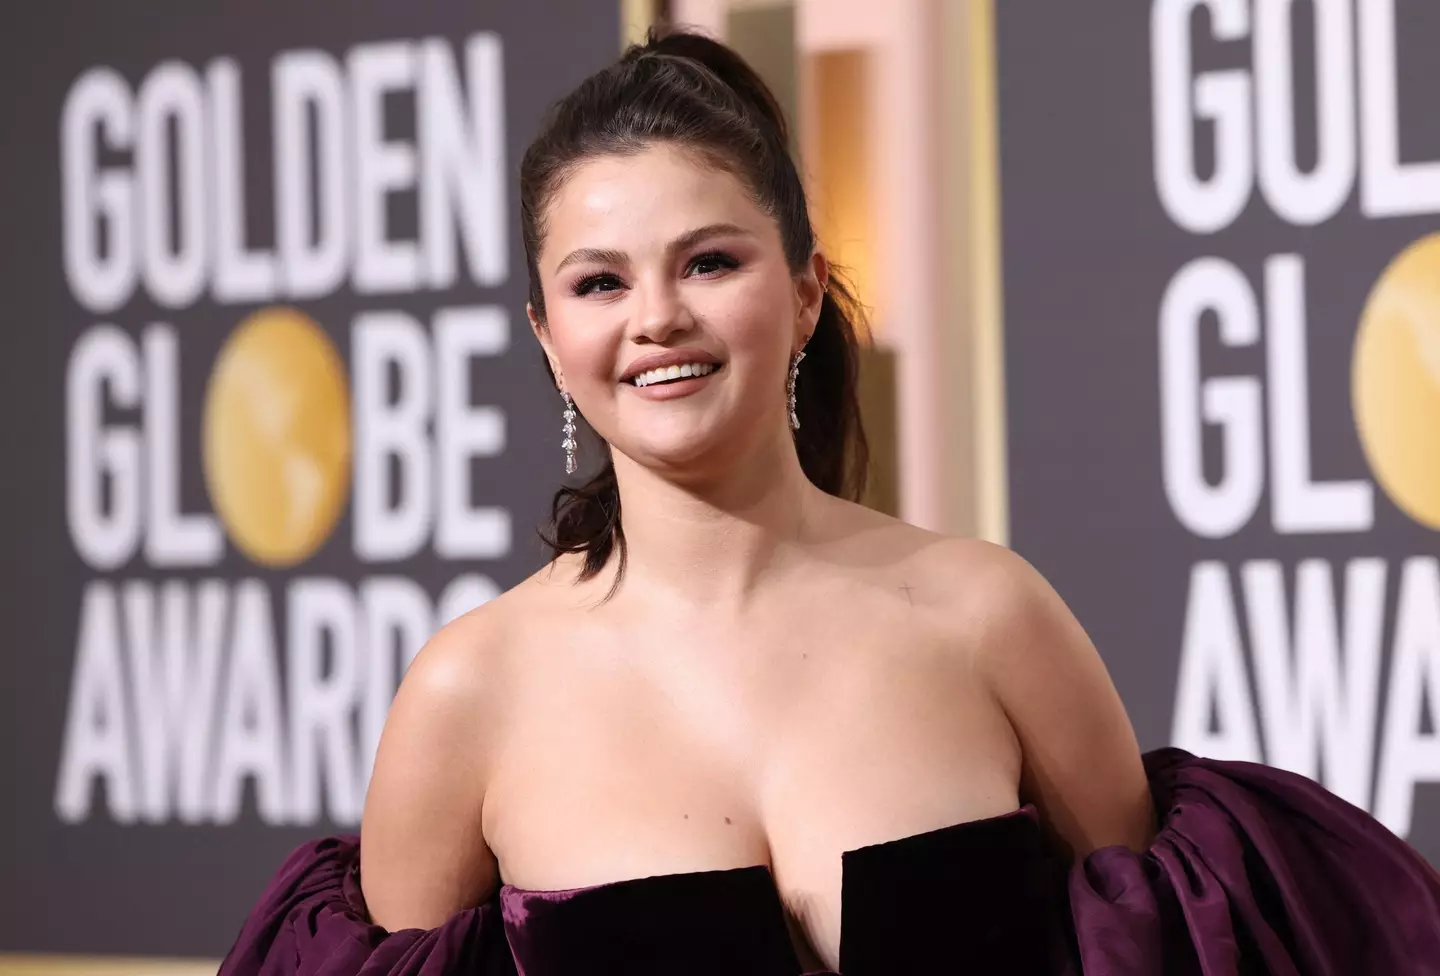 Selena Gomez has admitted that hurtful comments from trolls left her 'crying her eyes out'.